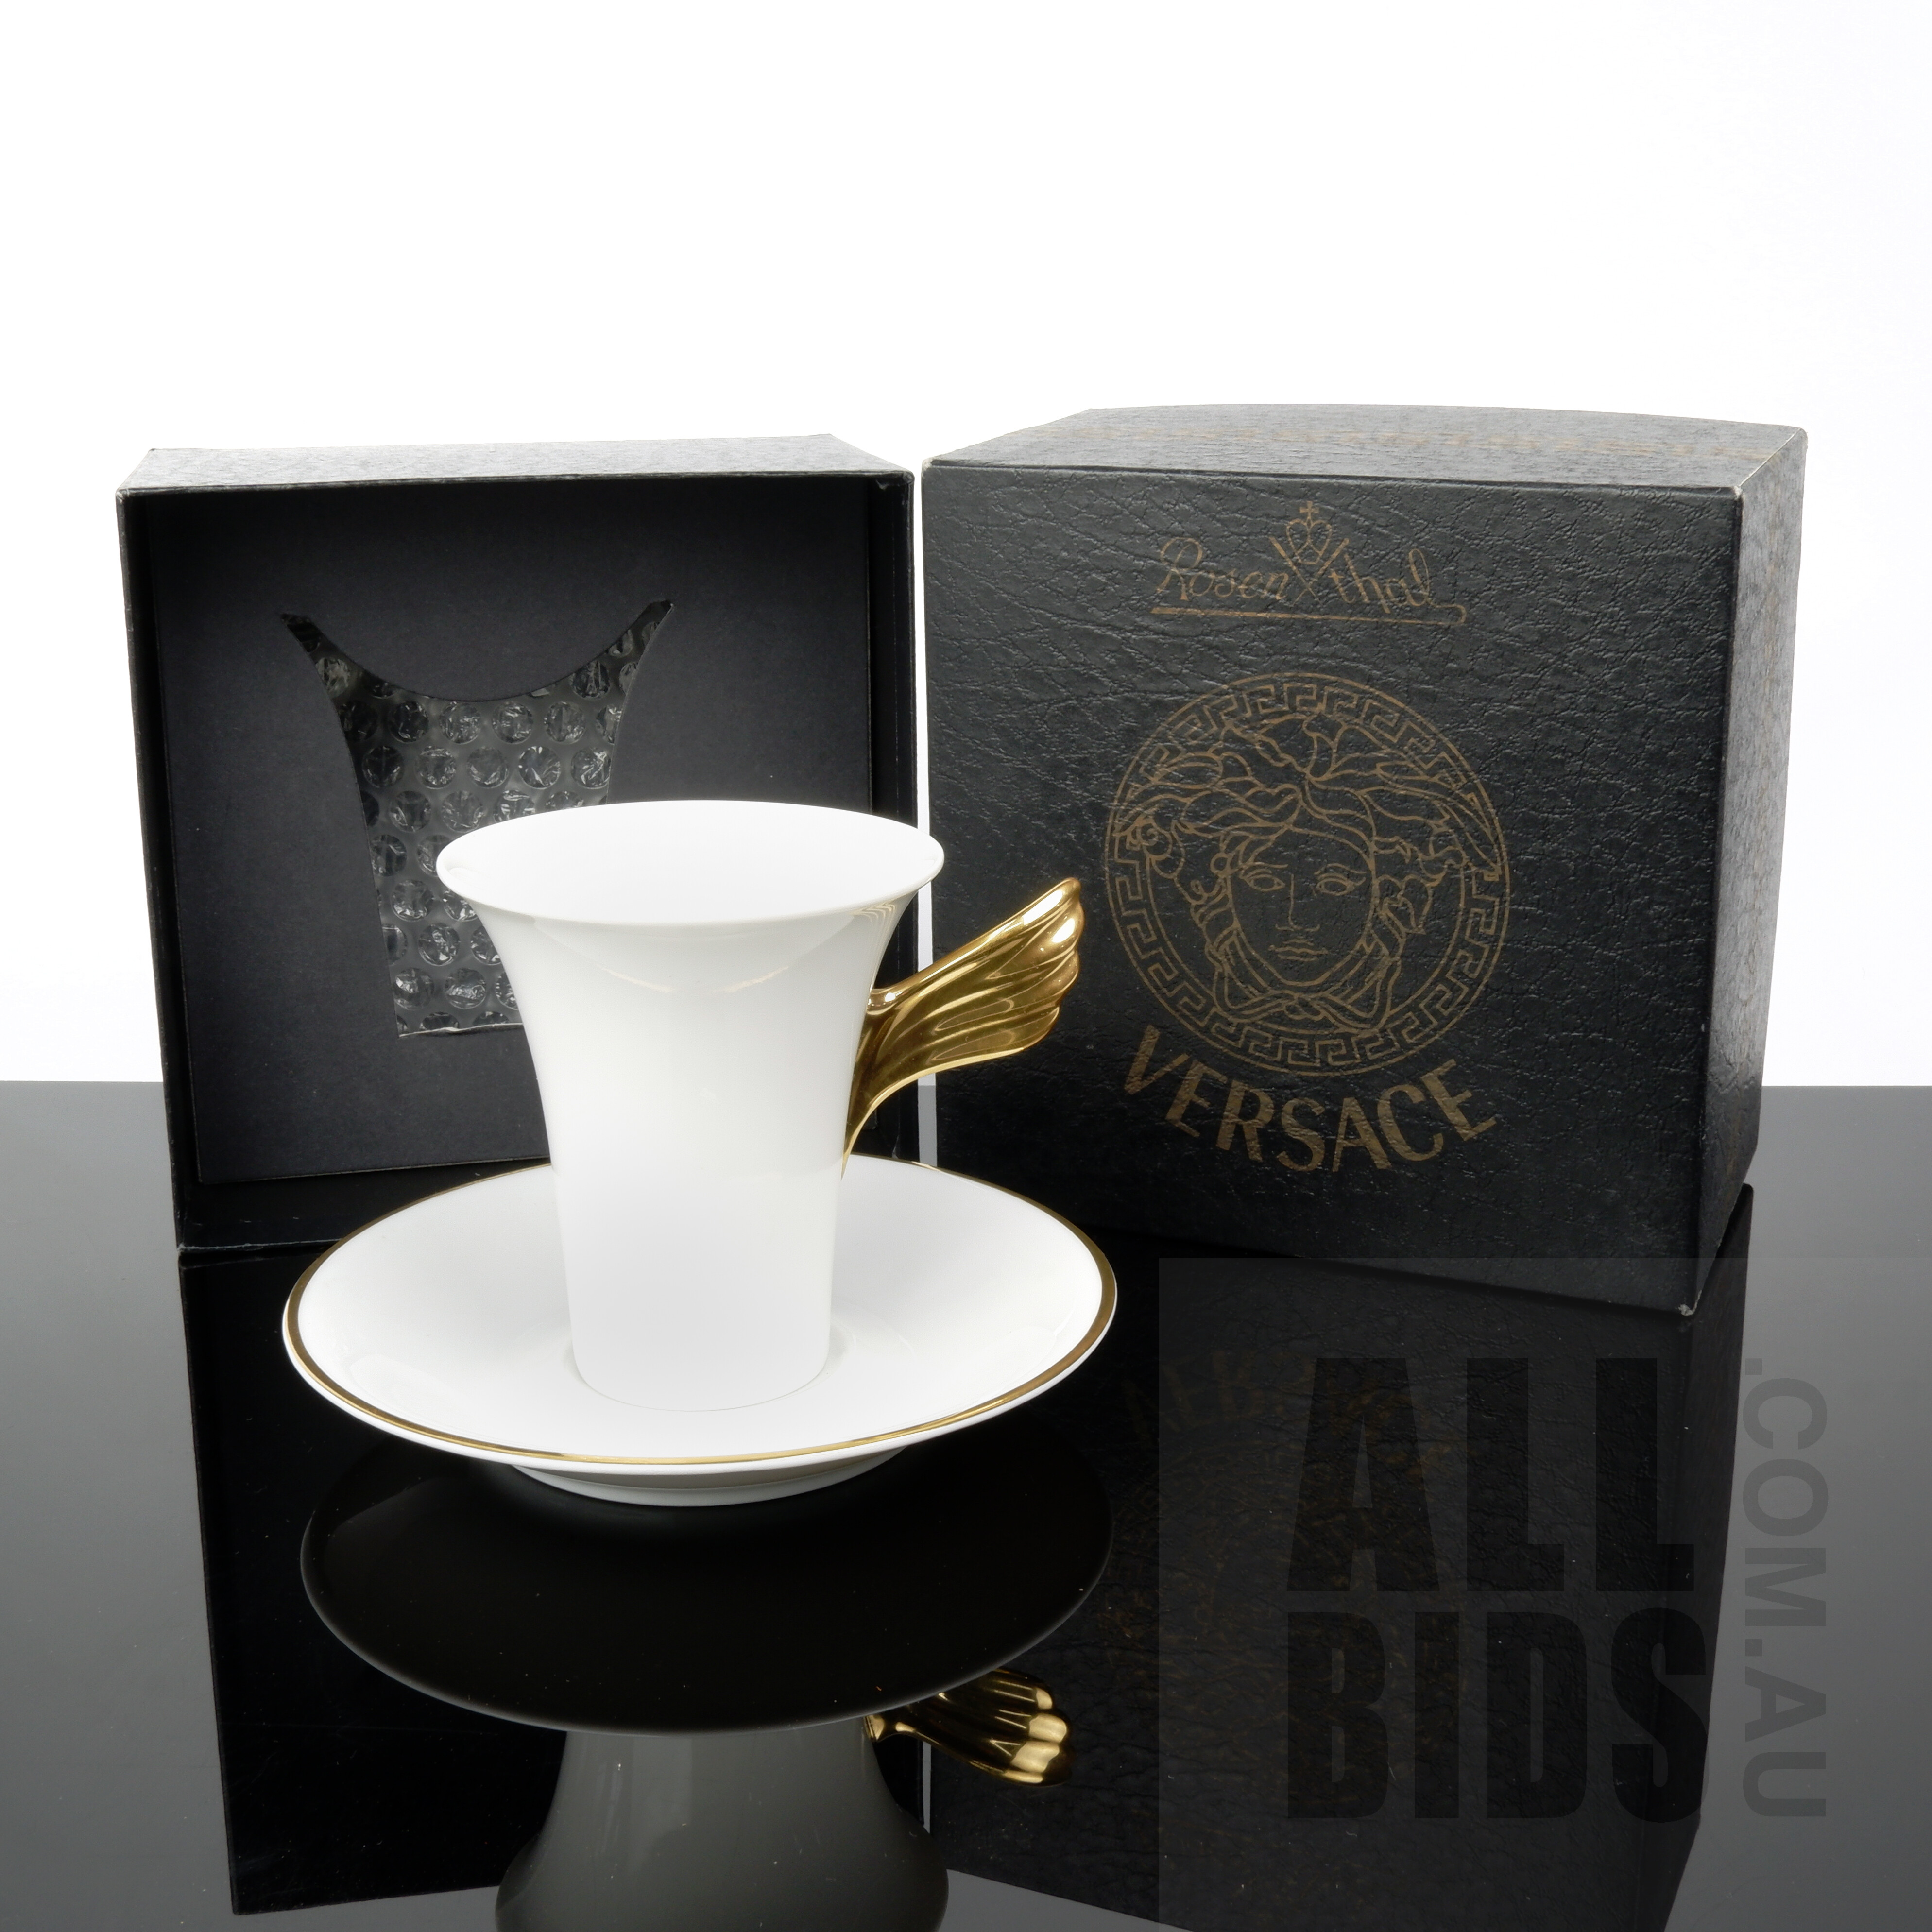 '5th of 8 Available - One As New Boxed Versace Special Edition Nescafe Gold Gilt Porcelain Coffee Cup and Saucer Manufactured by Rosenthal Studio-Line'